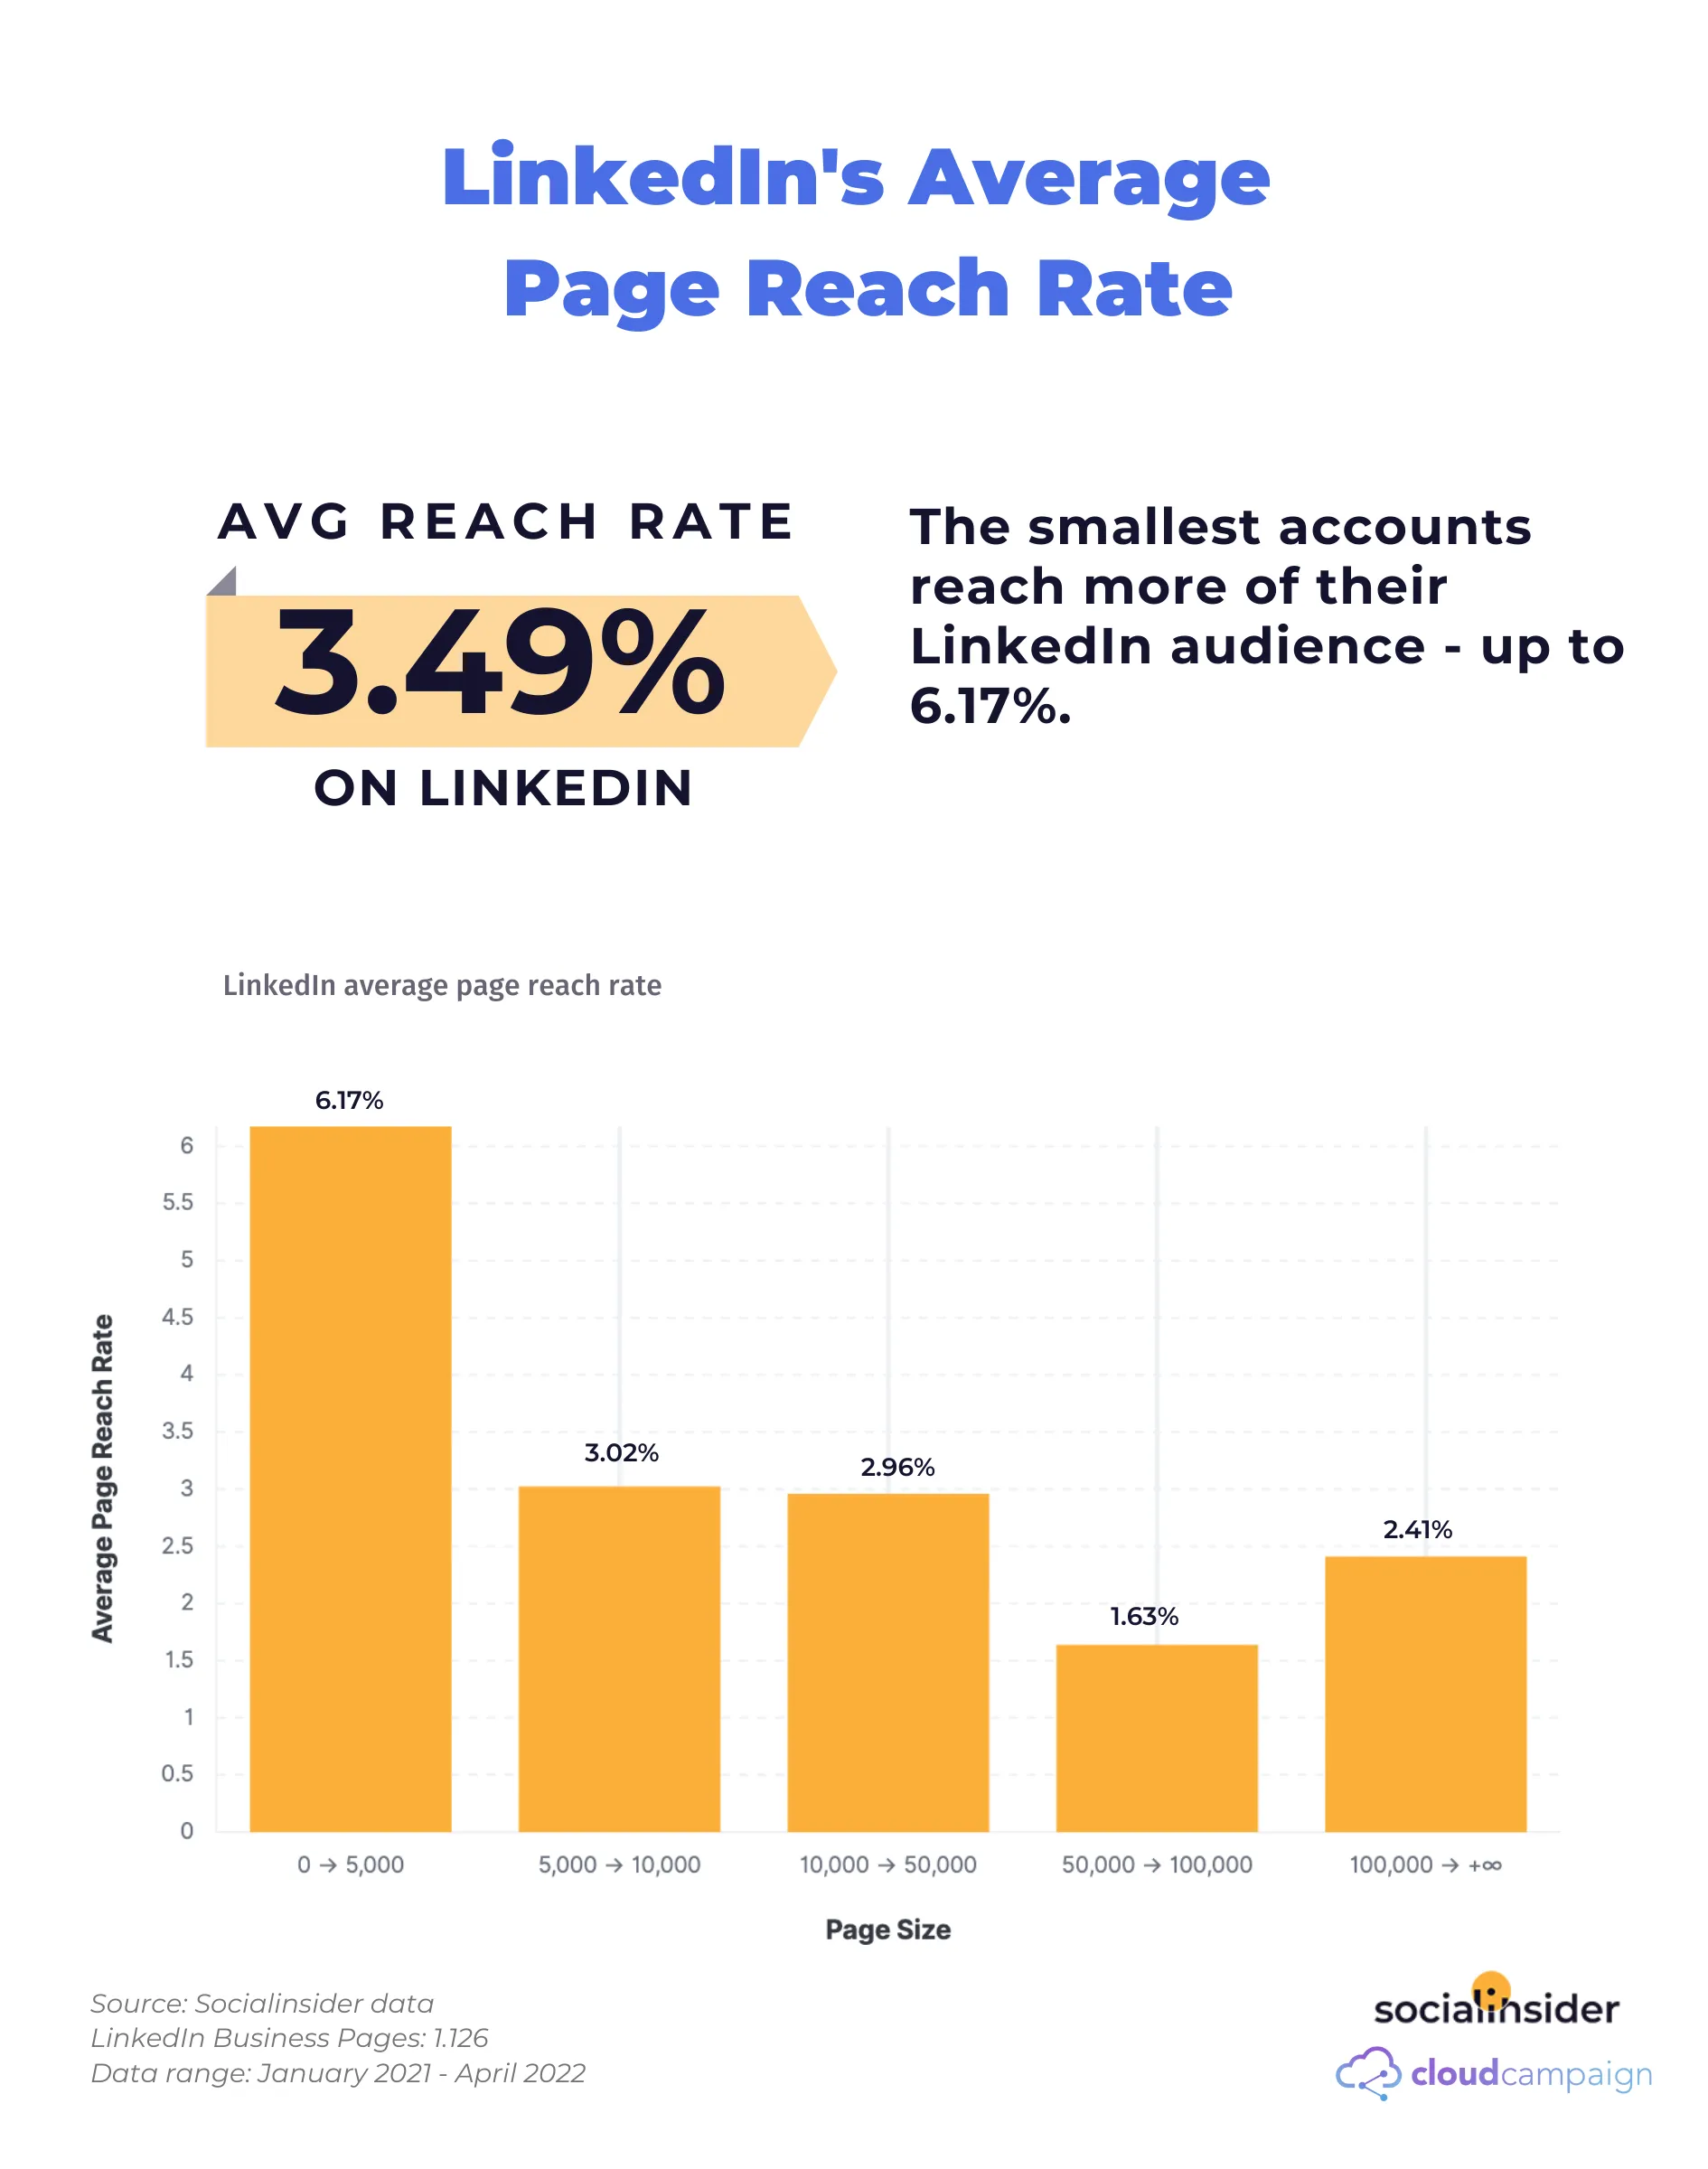 LinkedIn's average page reach rate